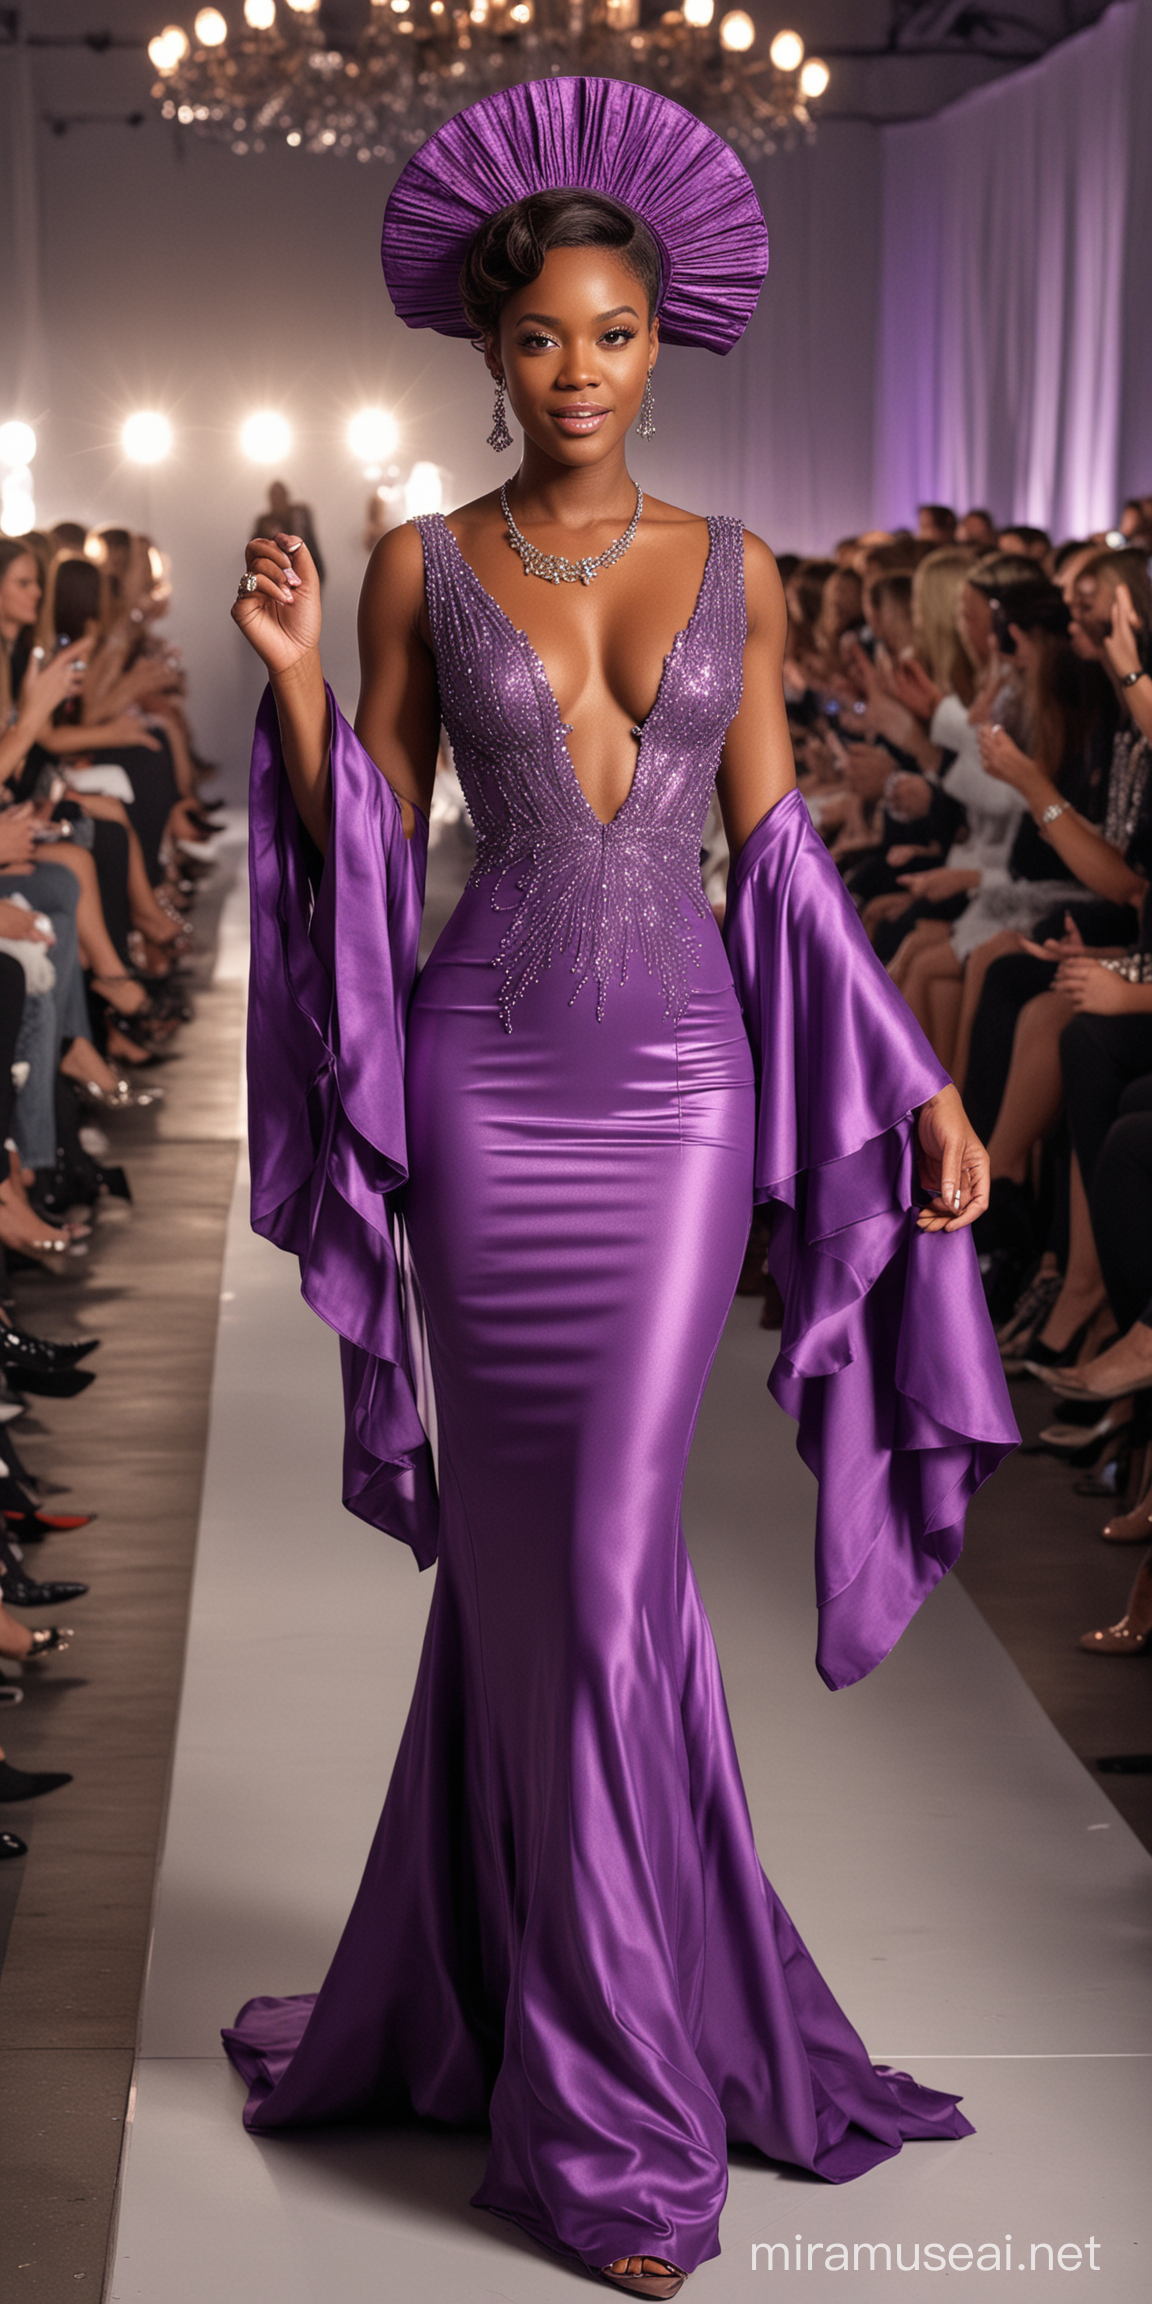 generate a 3d 4k HDR 300 Dpi full  body image of a female African American  model. with fine melanin skin tone high gloss.she  show casing her extravagant fashionable purple hat dress in a sophisticated purple maxi evening attire with bell sleeves,her hair is long and straight remy, with nice heels.must have flawless makeup and earrings.she strike a pose  on the runway  for  a glamour shot moment showing off her elegant attire, she is. in the background her audience cheers on